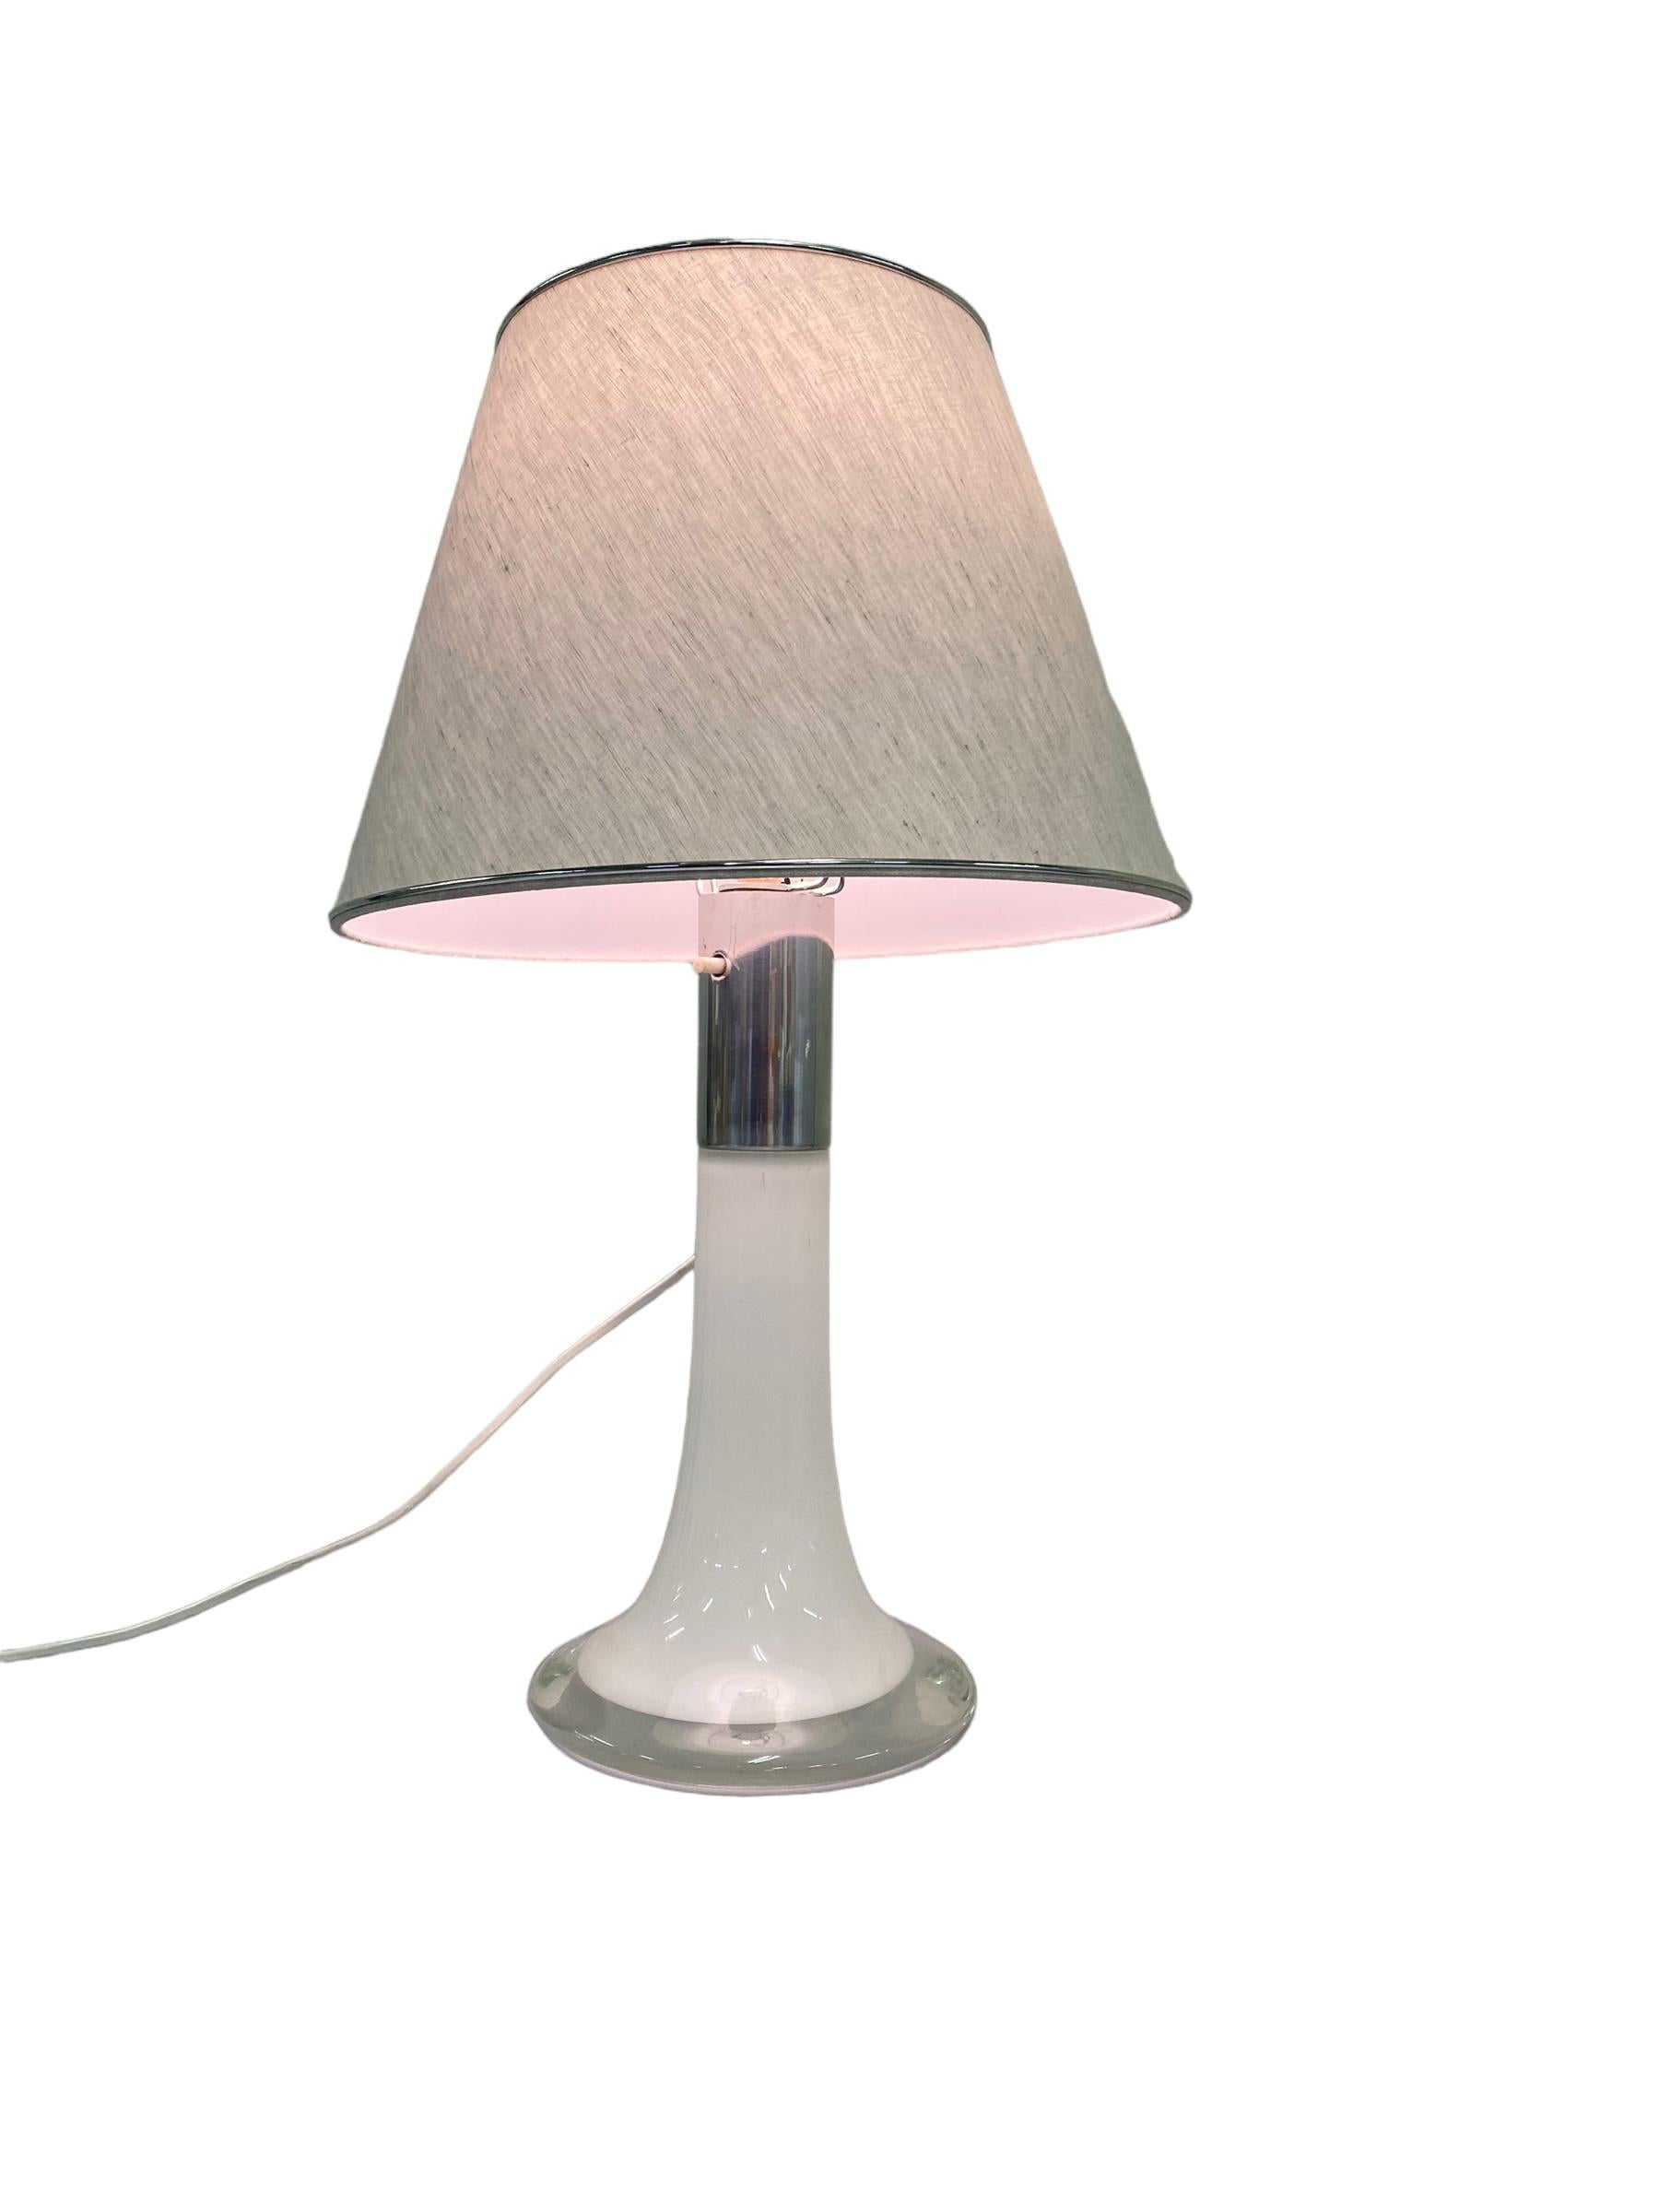 Lisa Johansson Pape Table Lamp Model 46-017, Orno 1960s In Good Condition For Sale In Helsinki, FI